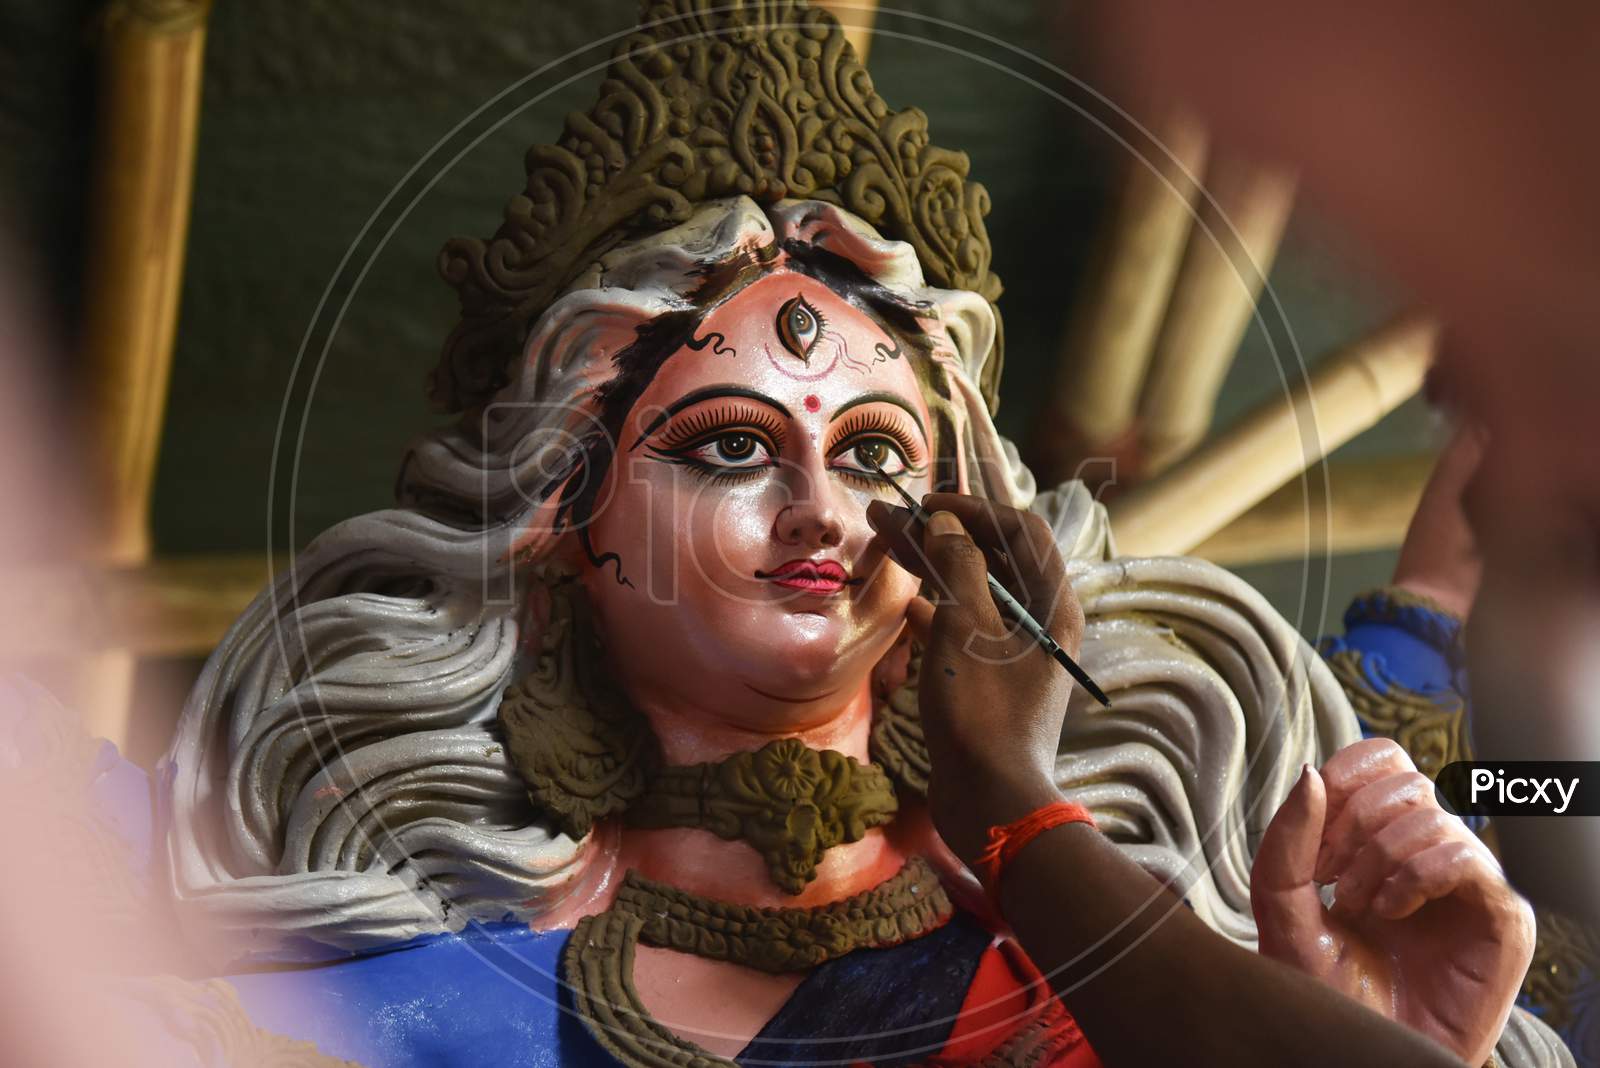 Artist Gives The Final Touches To An Idol Of The Goddess Durga Ahead Of Durga Puja Festival, In Guwahati, Assam, India